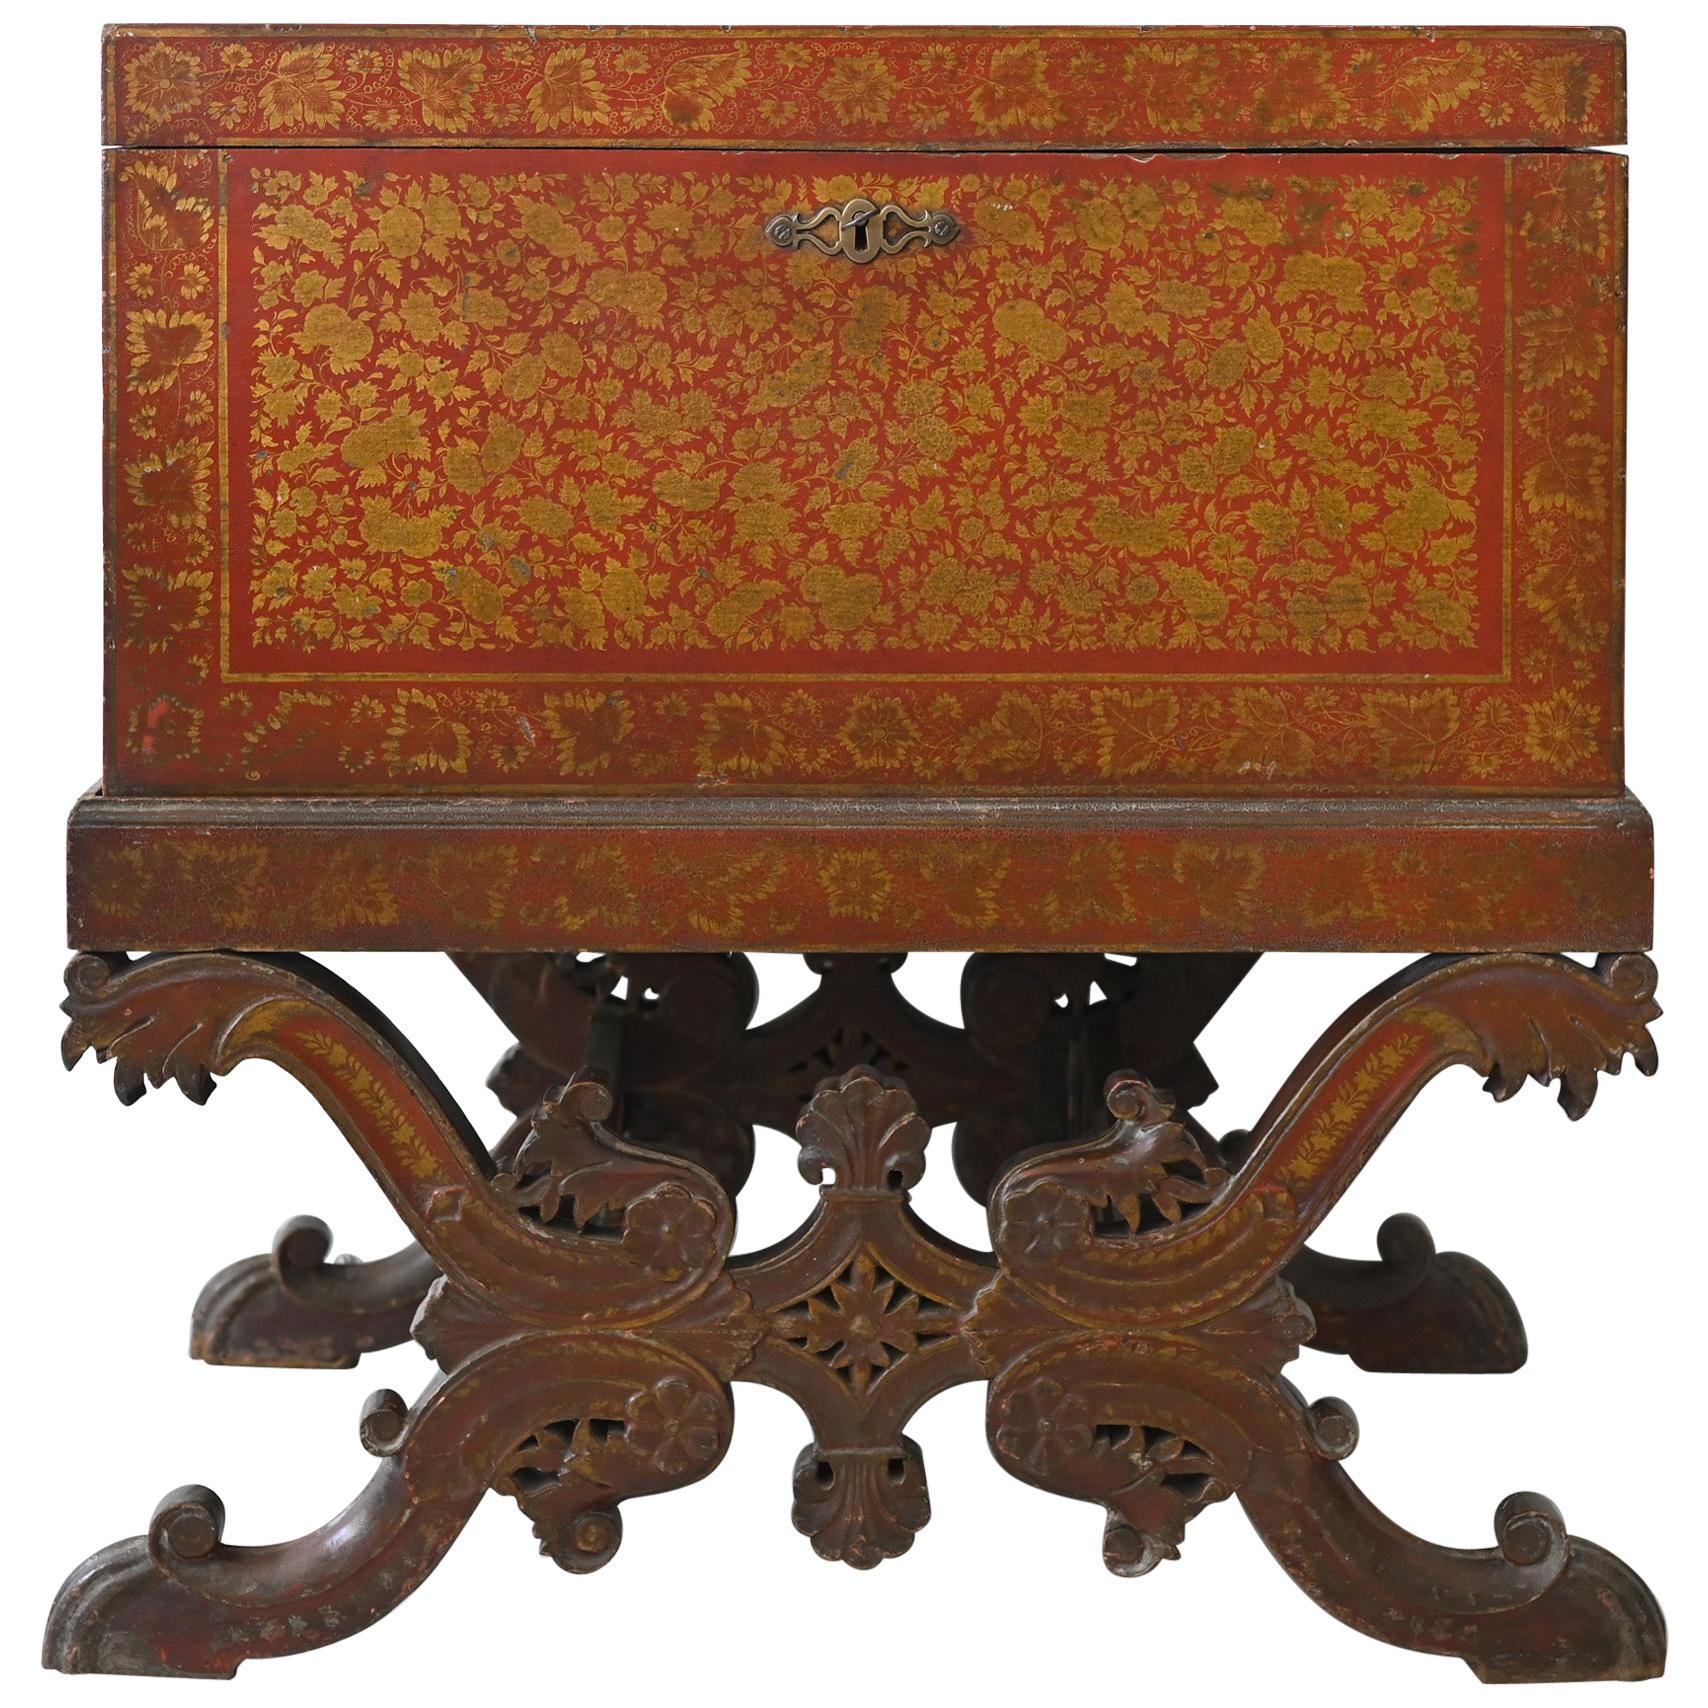 Red Lacquered Chest on Stand 19th Century, British India, 1860